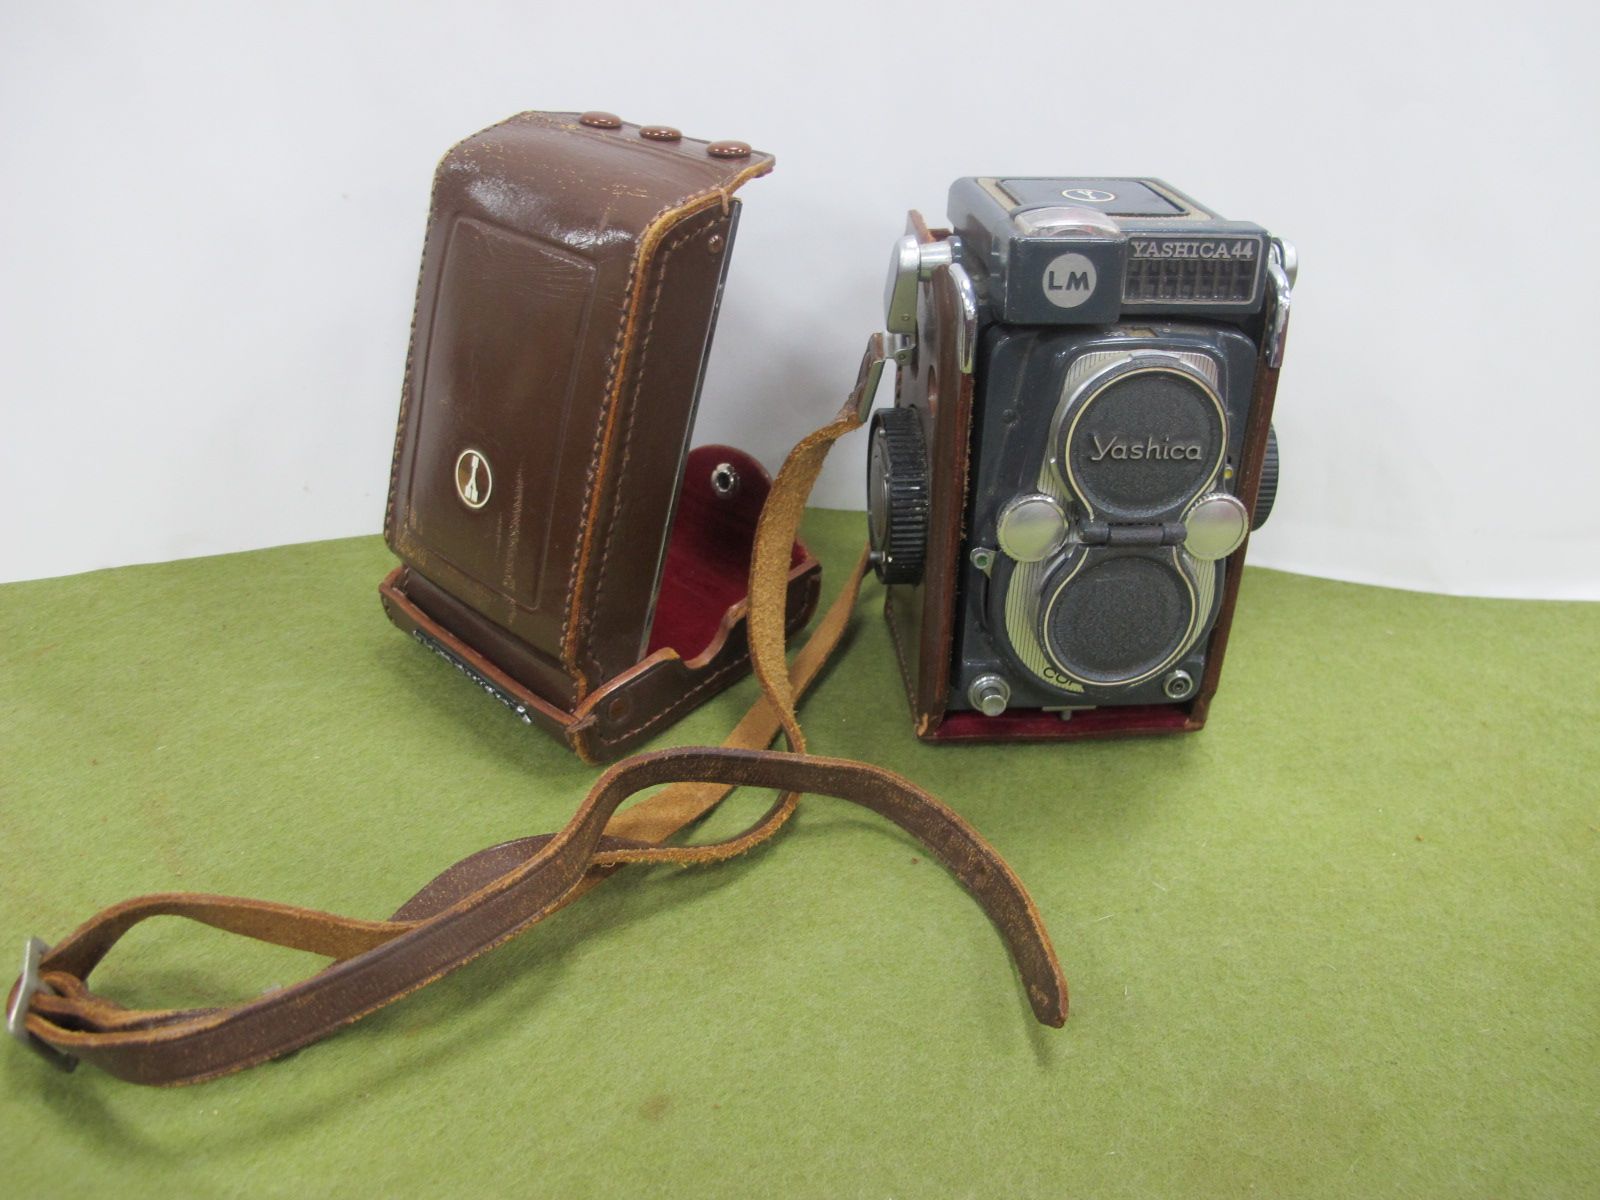 Yashica 44 Camera, with leather casing.